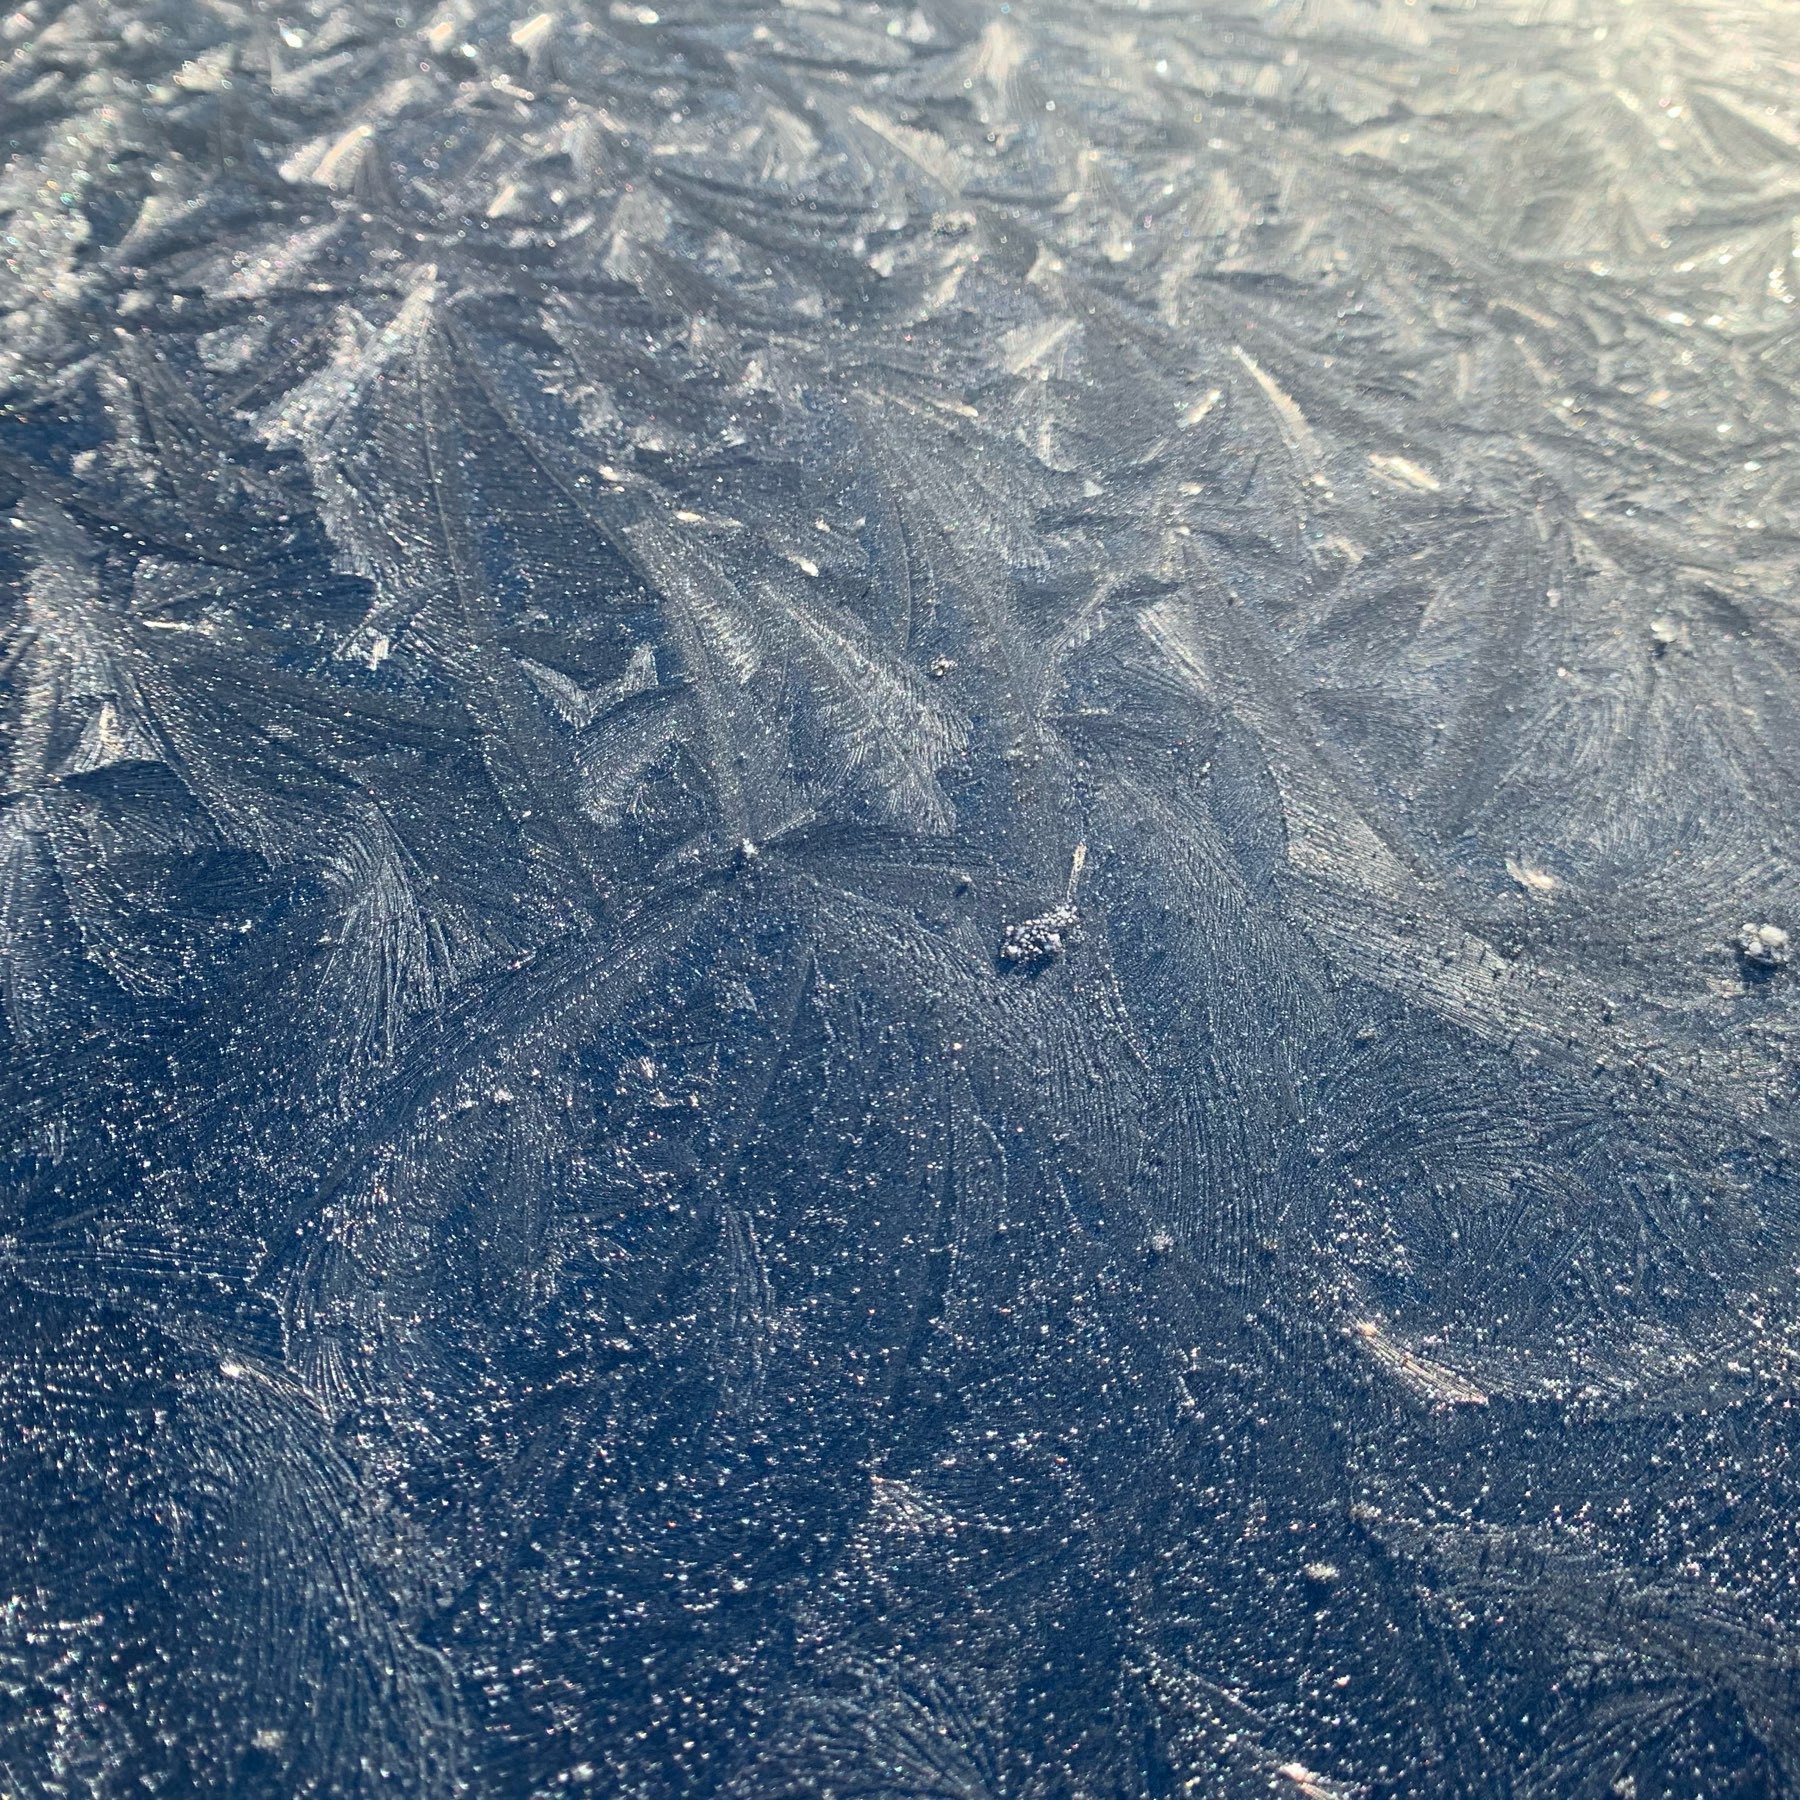 A pattern of frost on the car this morning